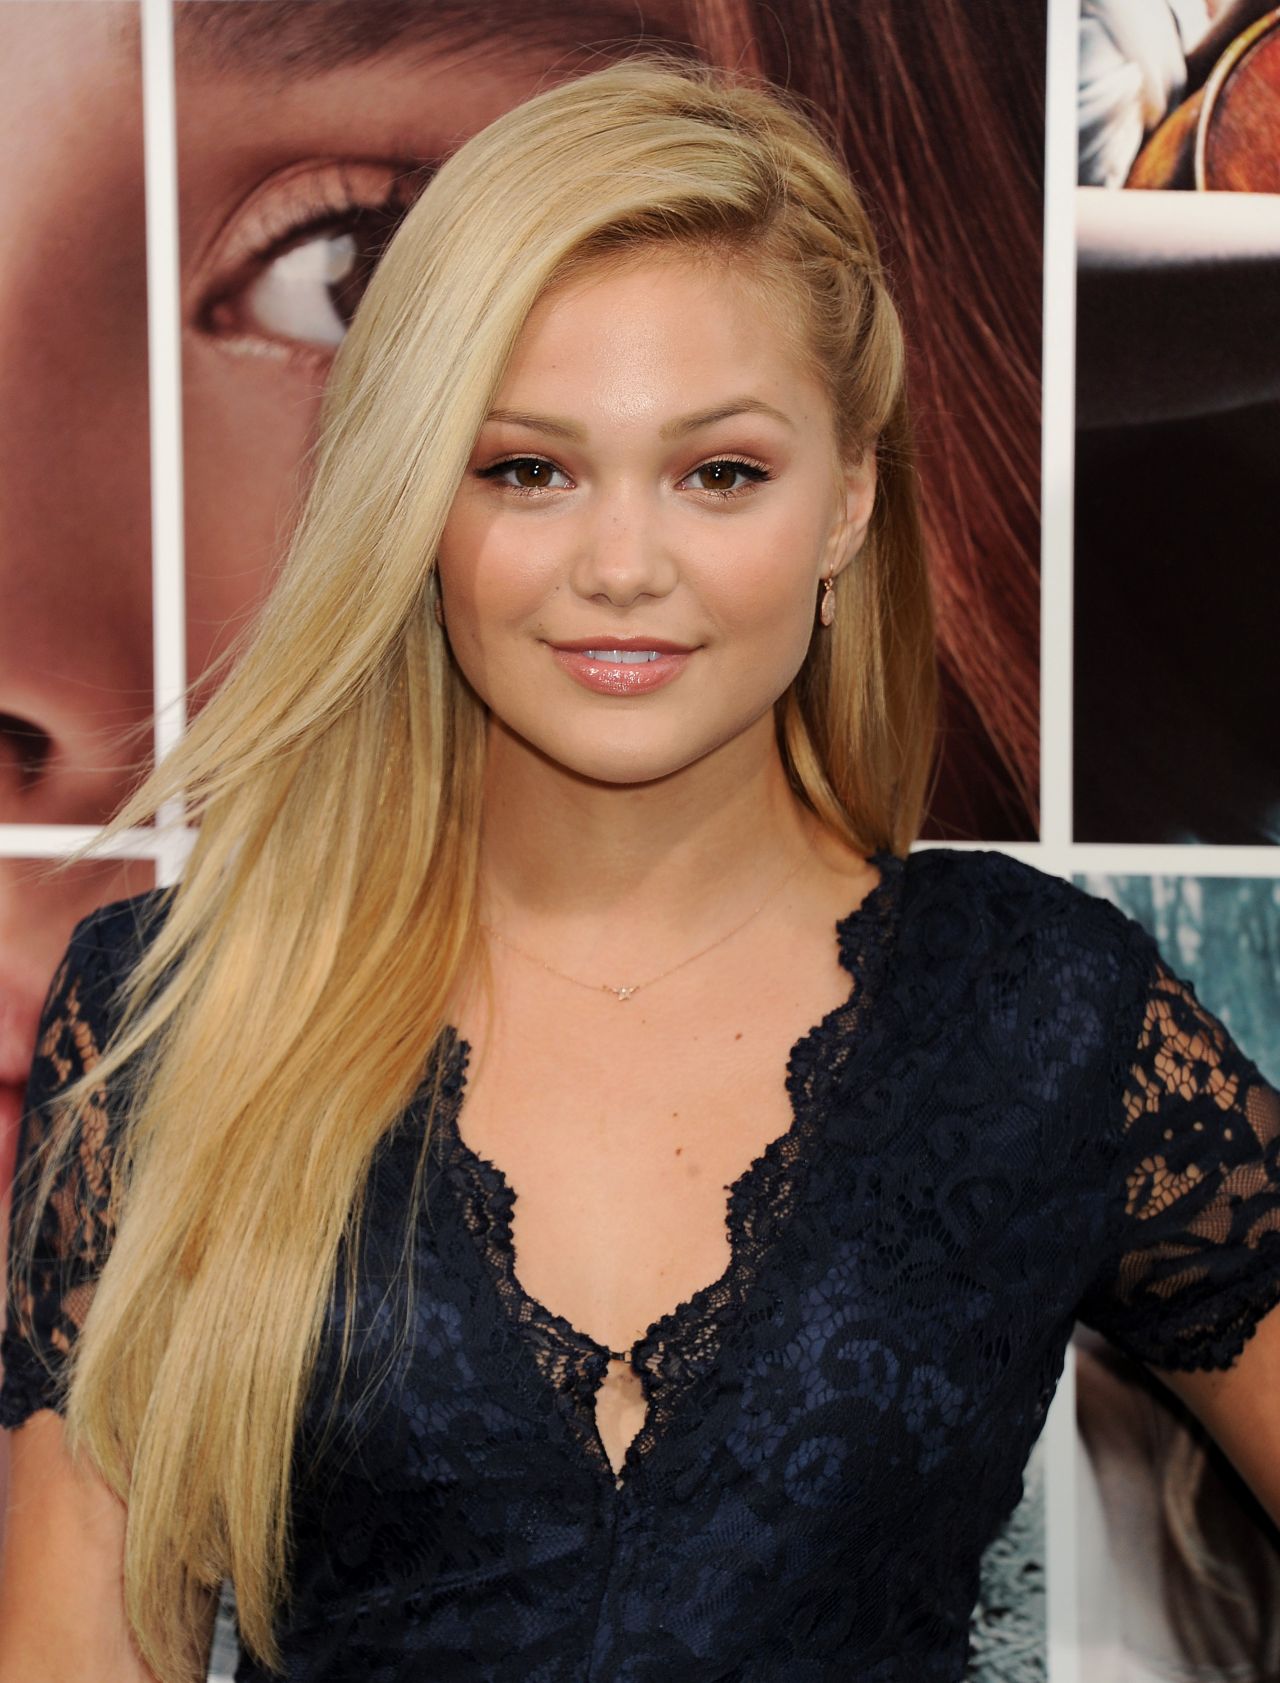 Olivia-holt-if-i-stay-premiere-in-los-angeles_1.jpg